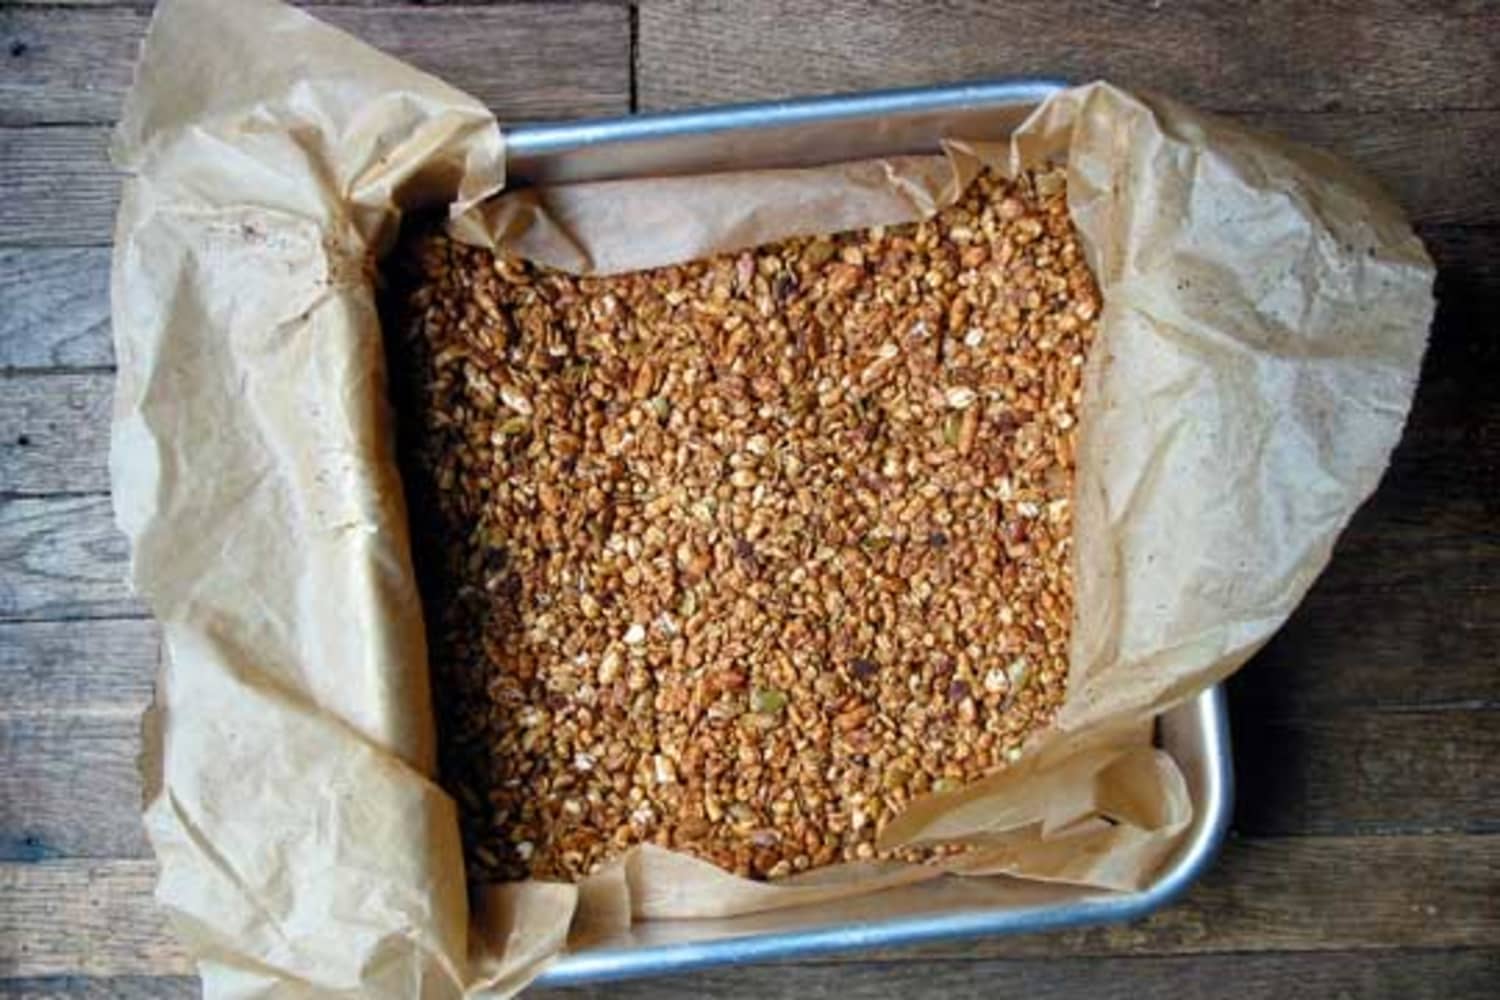 10 Reasons to Use Parchment Paper